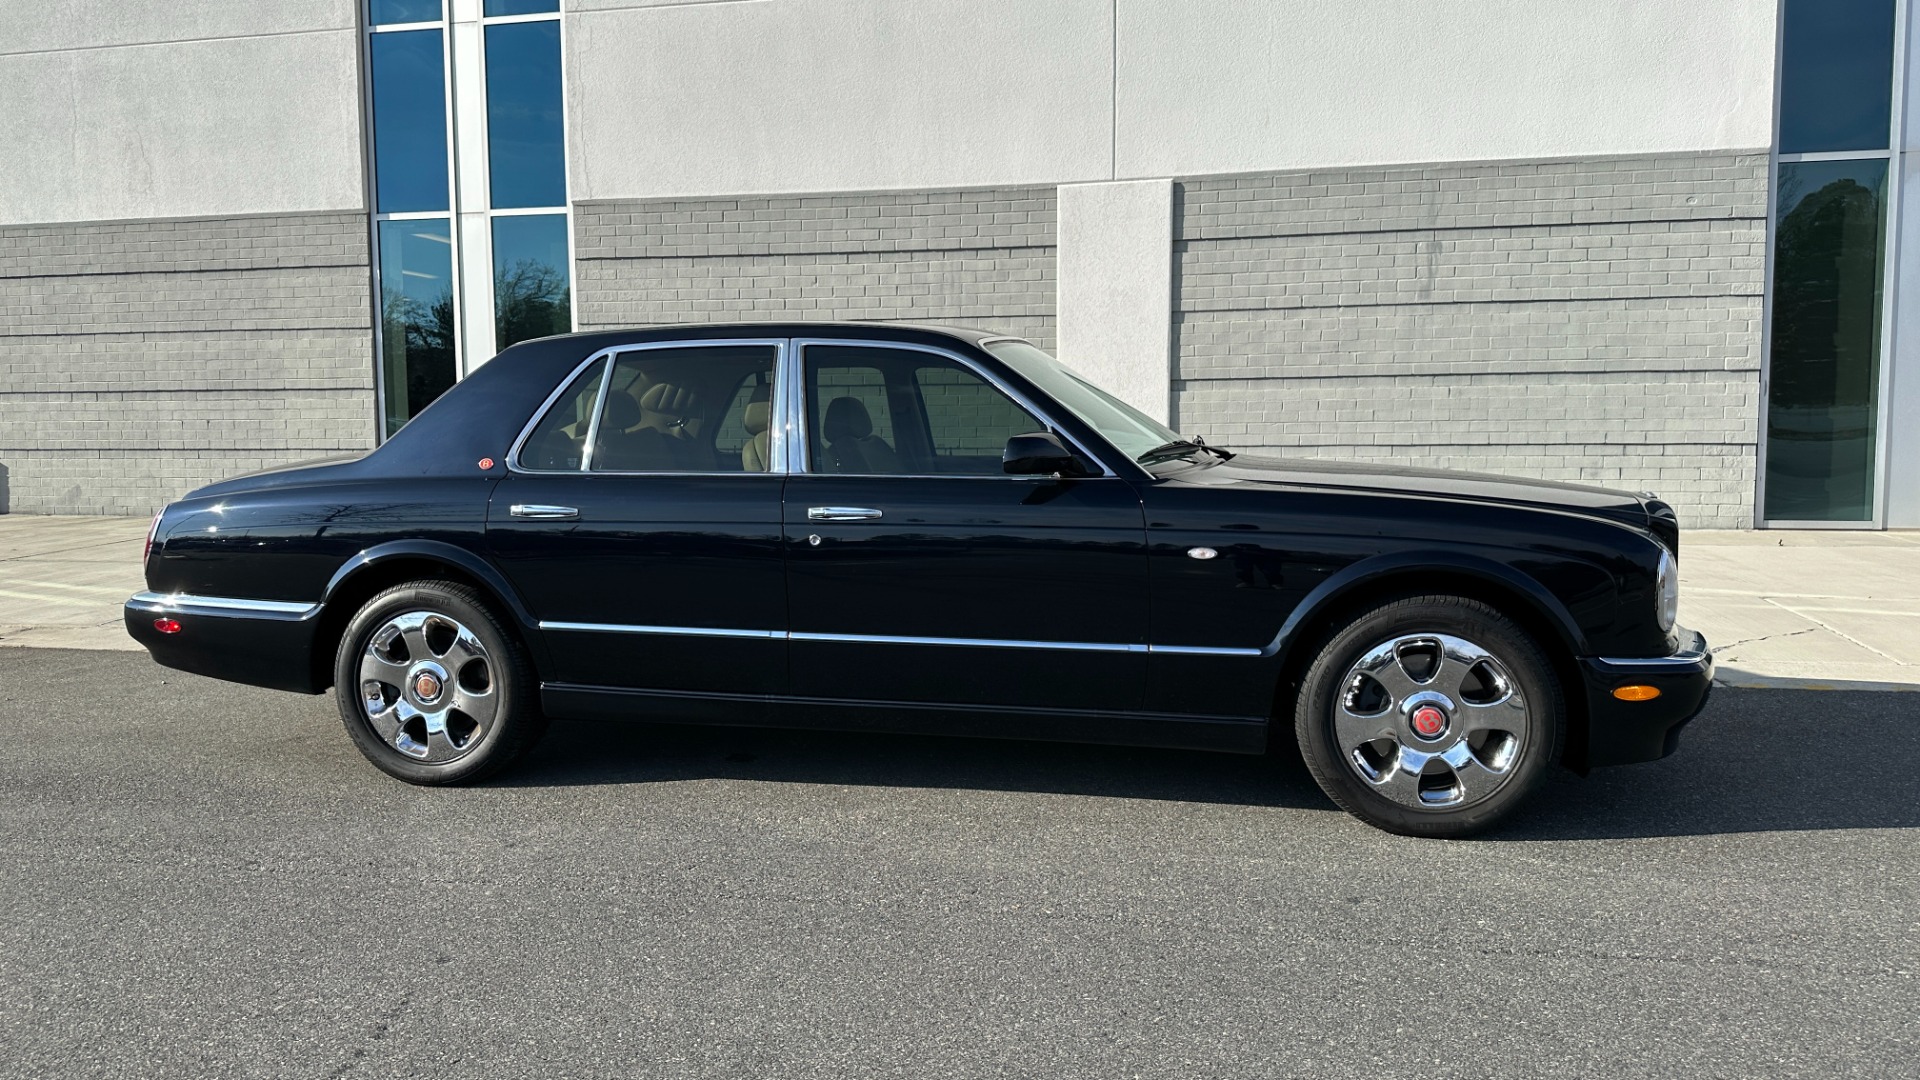 Used 2001 Bentley ARNAGE RED LABEL 6.75L V8 / TURBO / FULL LEATHER / WOOD TRIM / HEATED SEATS / SUNR for sale Sold at Formula Imports in Charlotte NC 28227 6